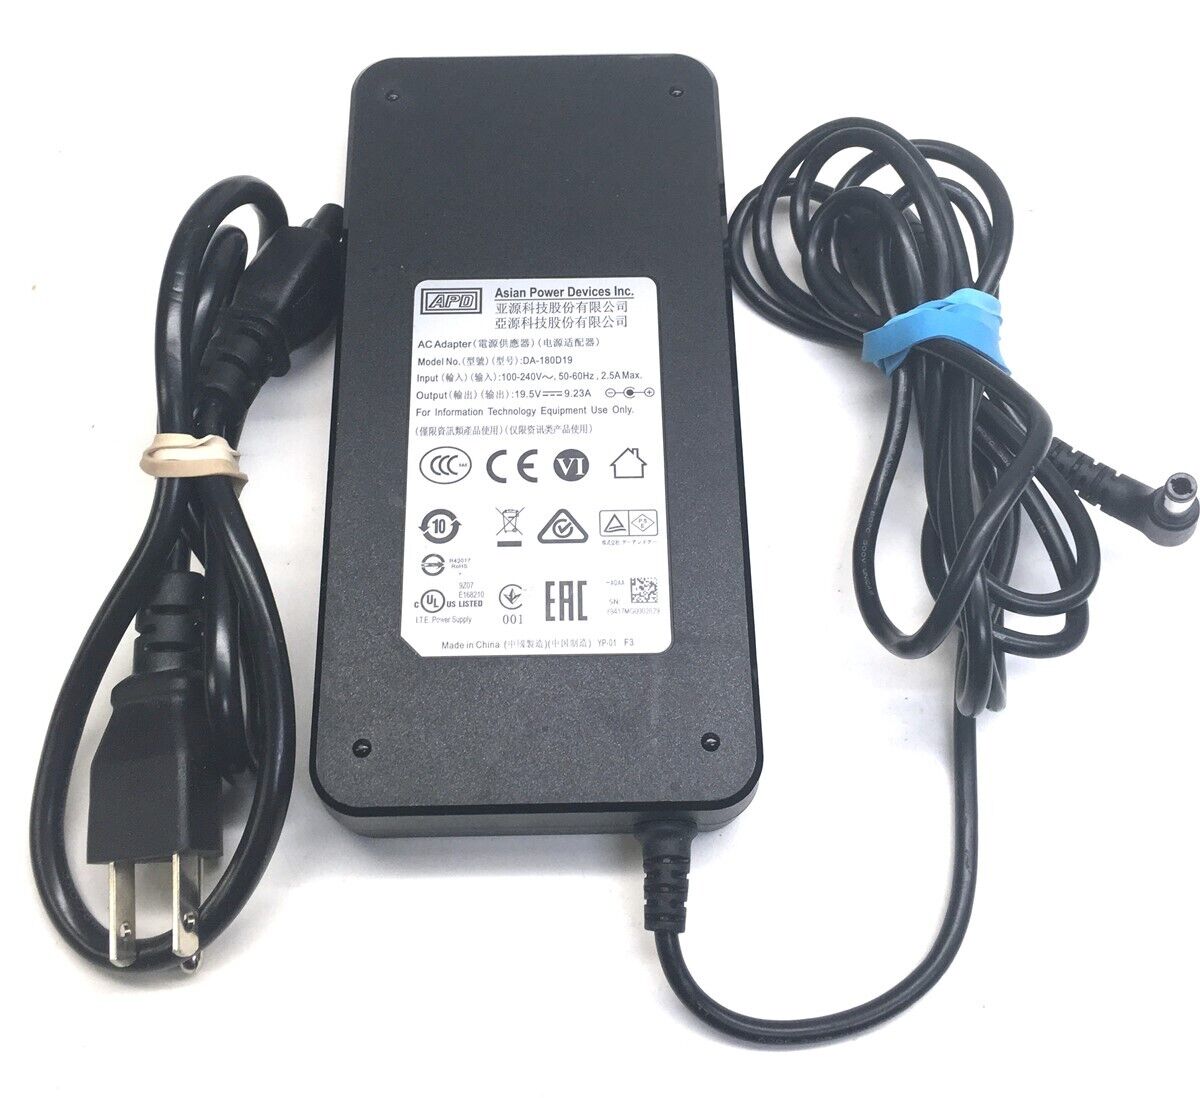 *Brand NEW* for Clevo Sager Laptop DA-180D19 19.5V 9.23A 180W APD AC Adapter Power Supply